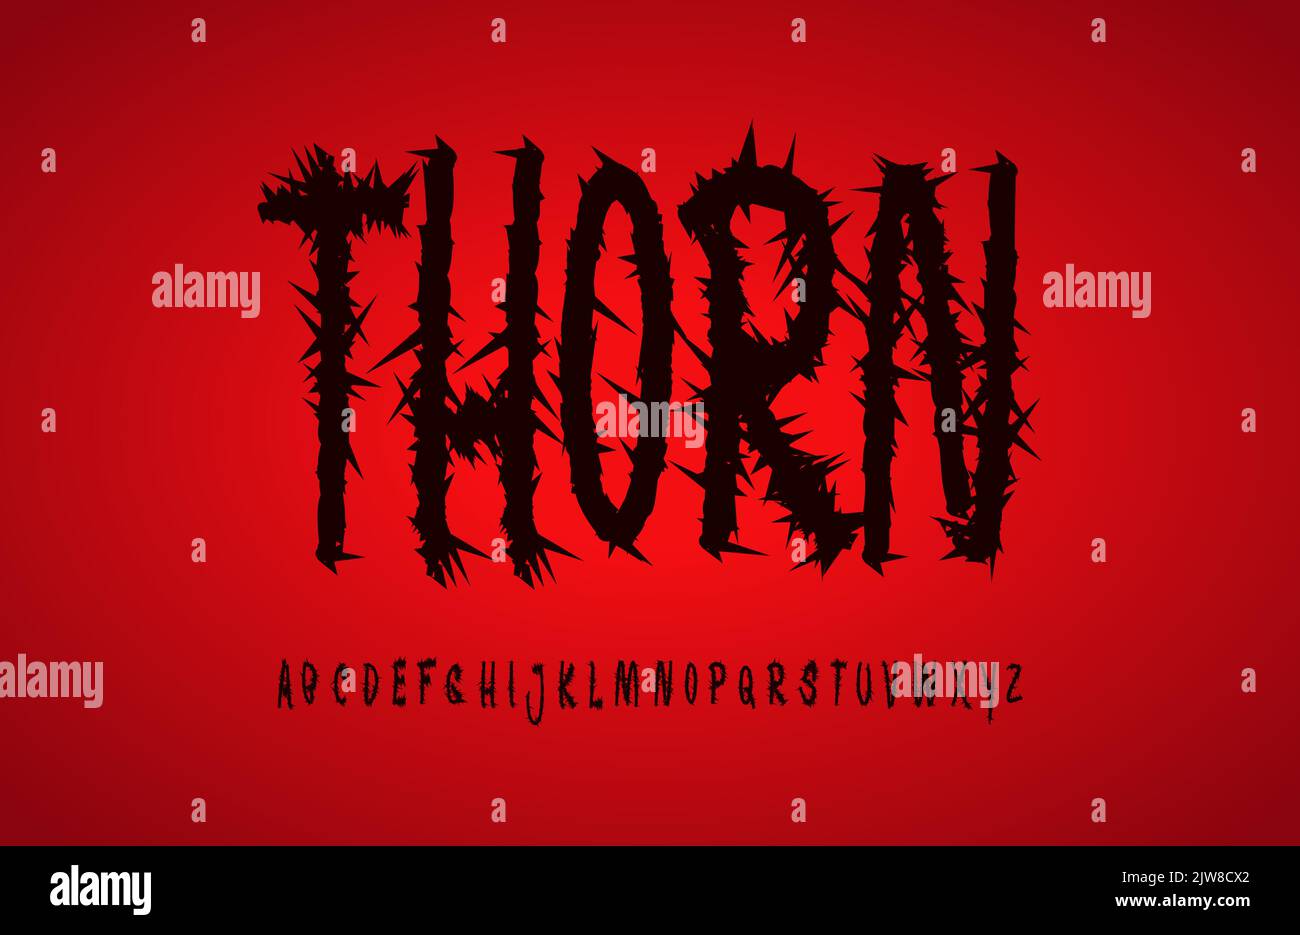 Thorn alphabet. Black ominous letters with thorns like prickly briar branches. Creepy and scary effect font for horror headline and logo, Halloween Stock Vector